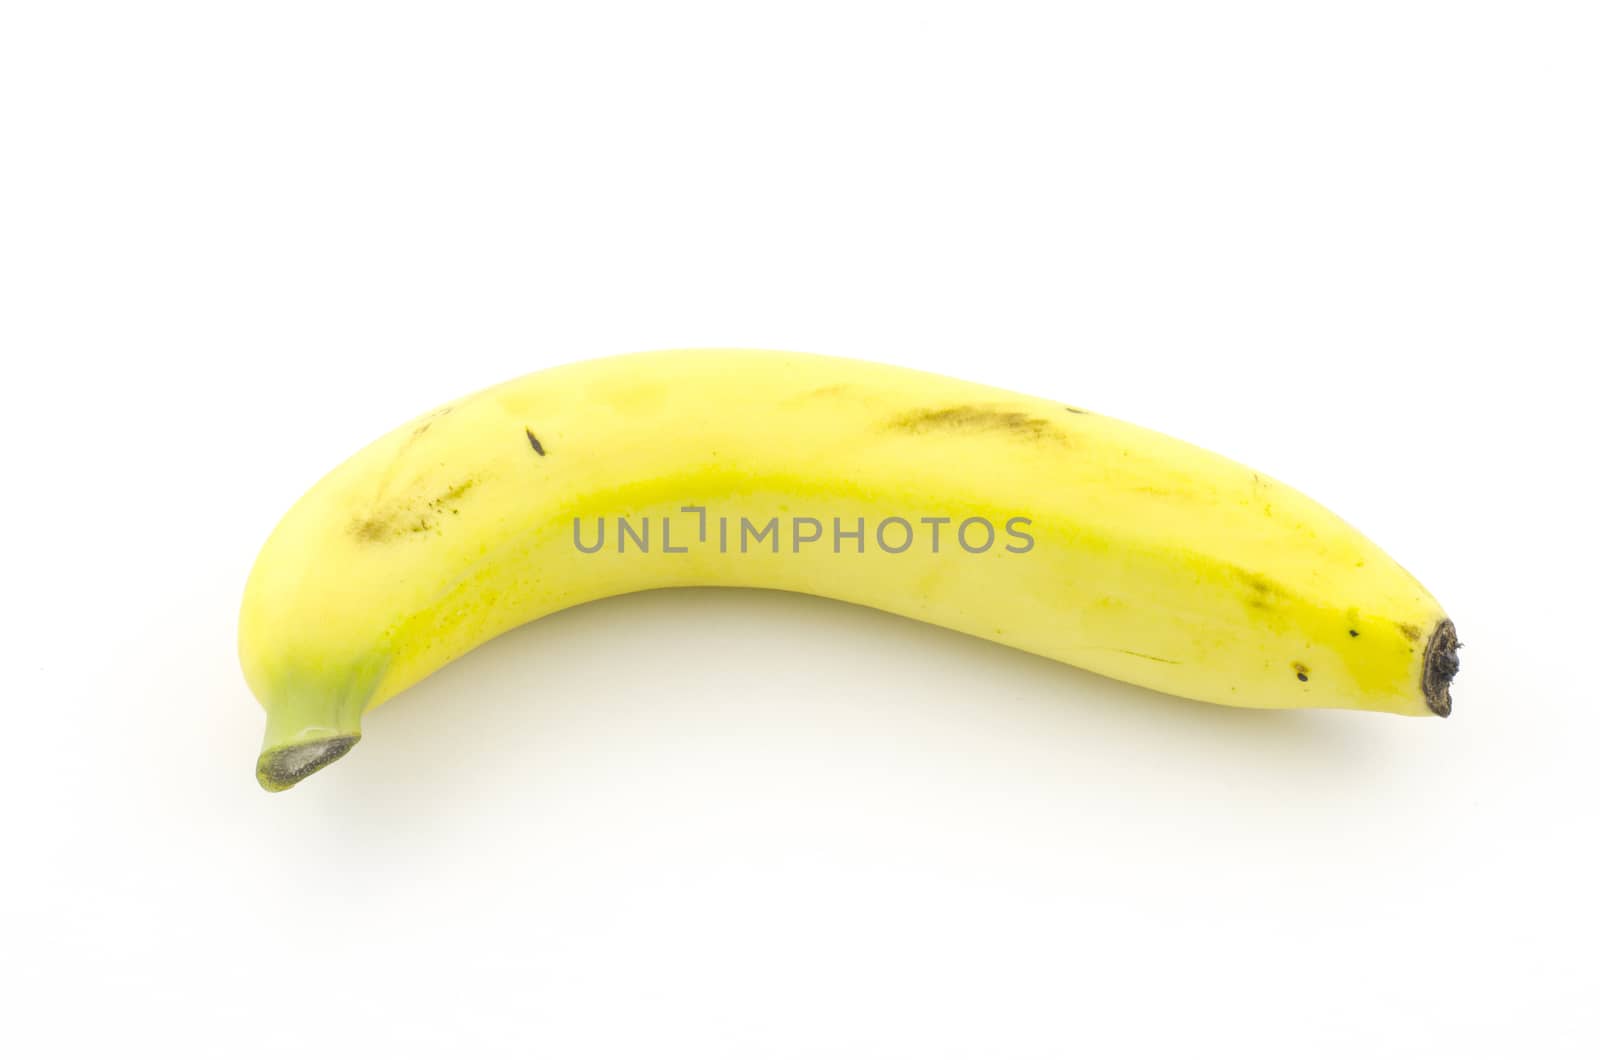 banana isolate with white background by ammza12